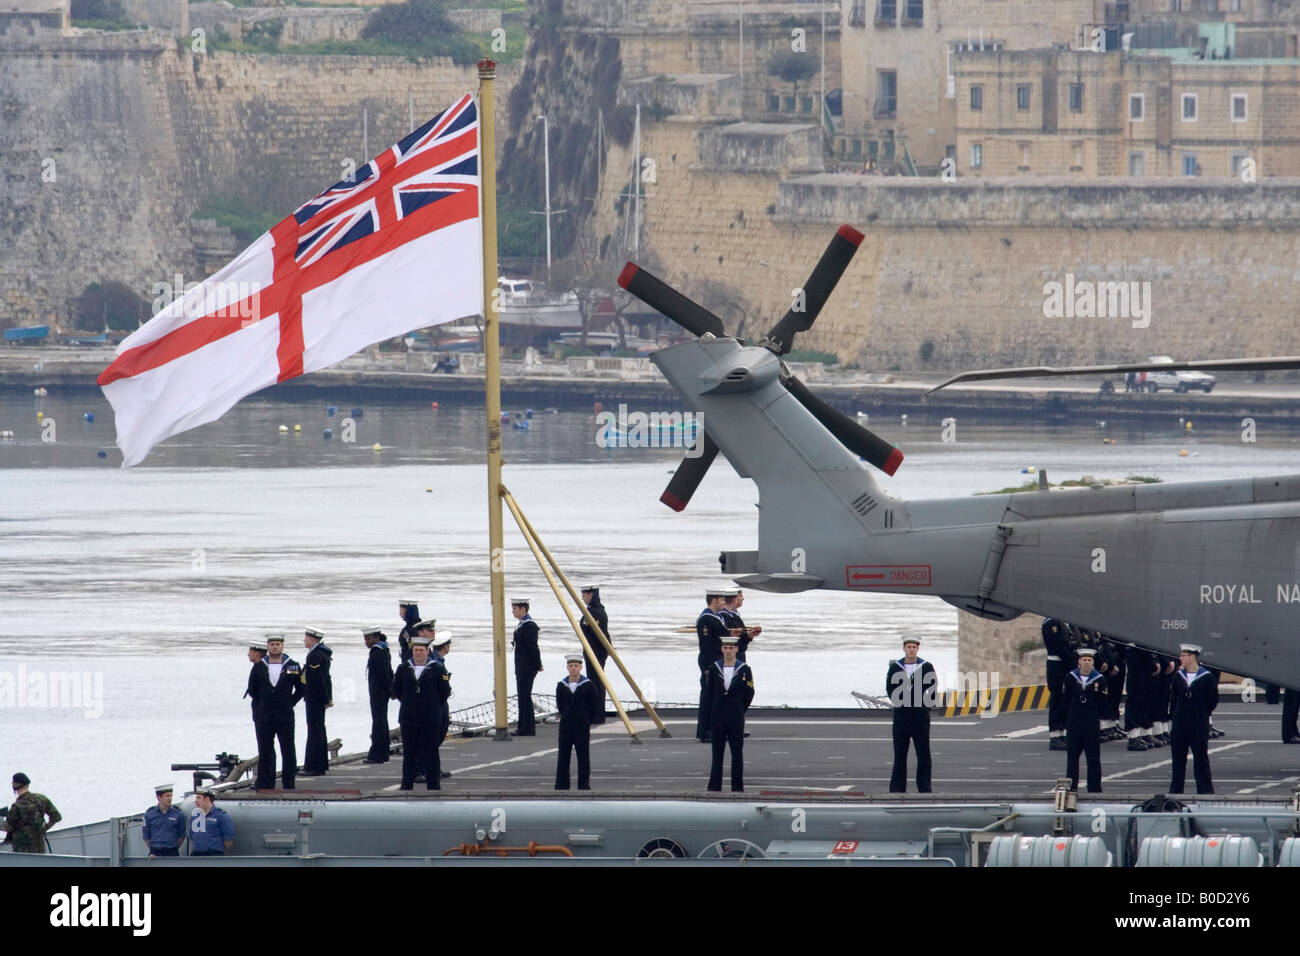 The Royal Navy aircraft carrier HMS Illustrious on arrival in Malta's Grand Harbour with sailors standing to attention beneath the White Ensign Stock Photo